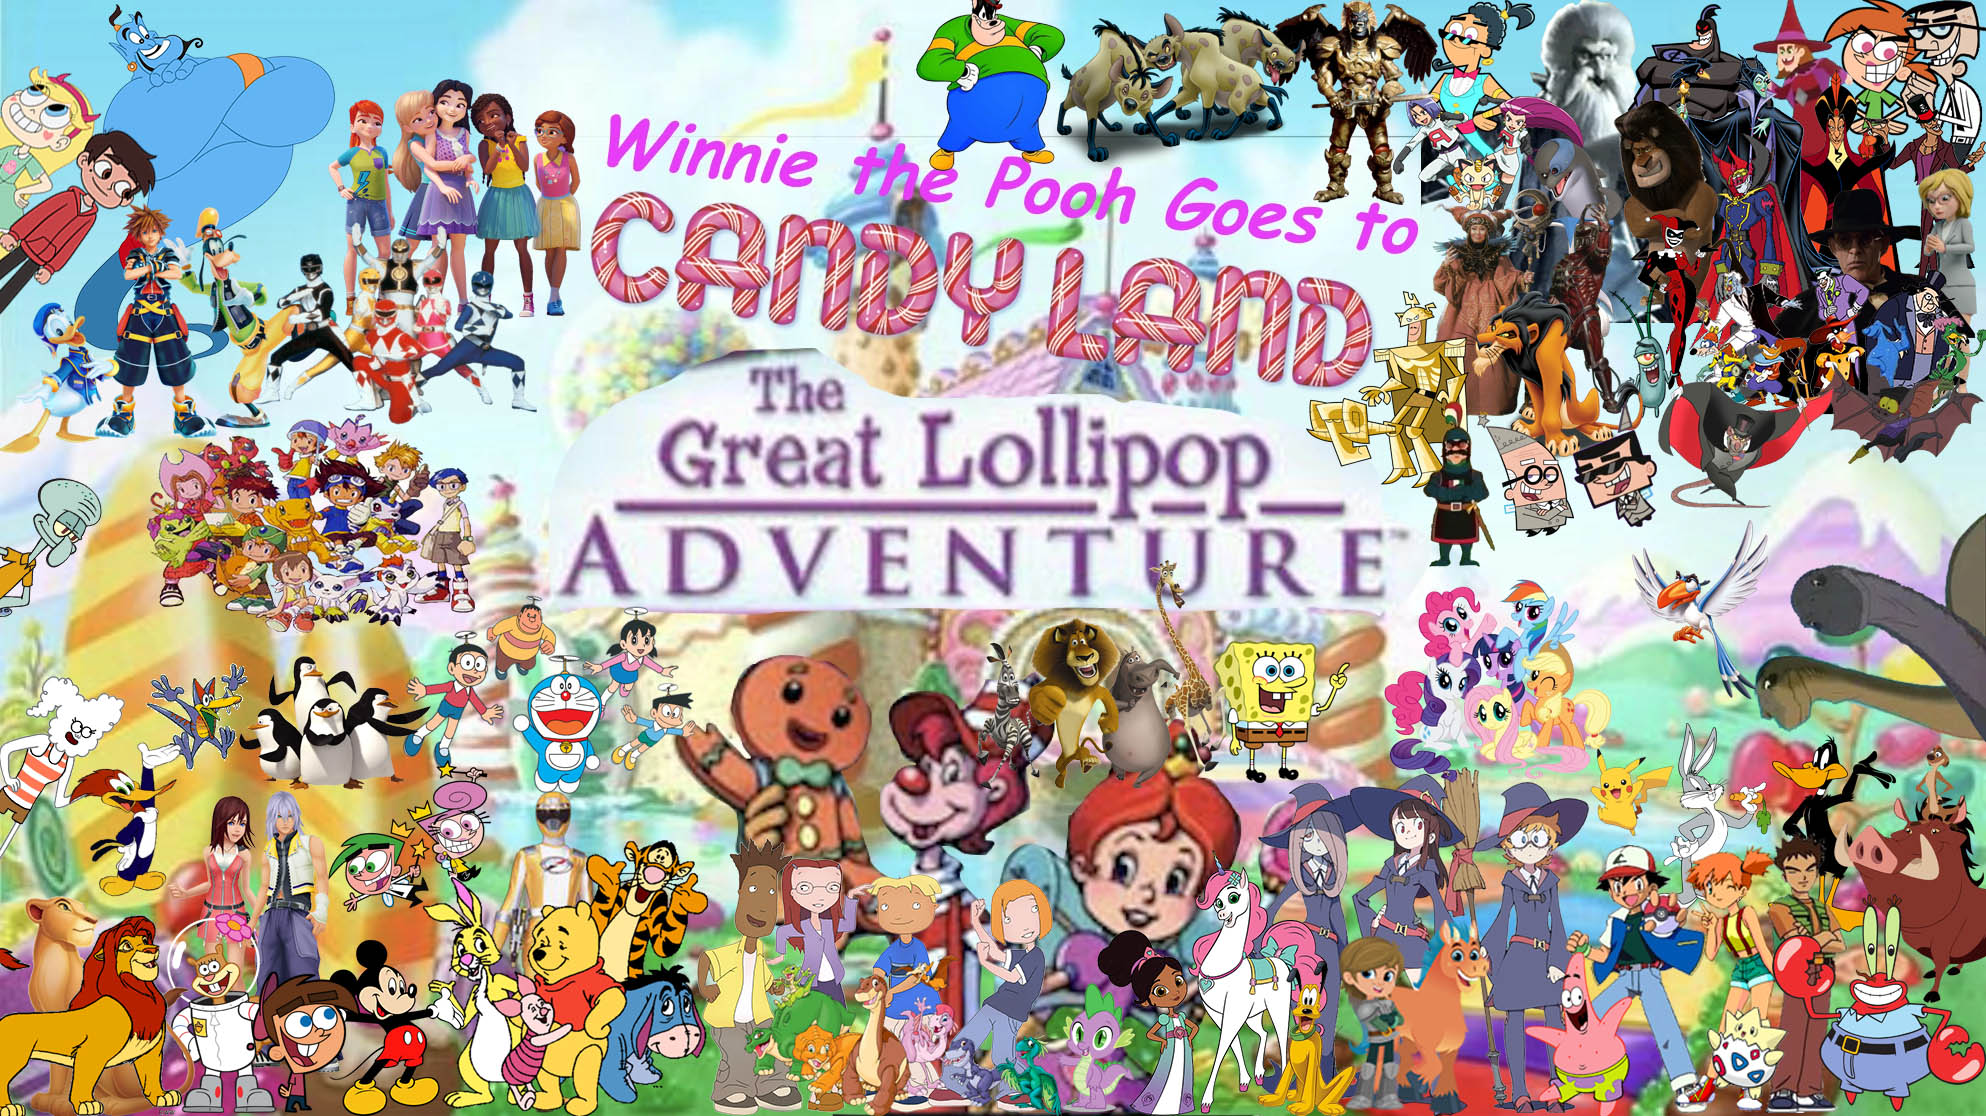 Candy Land: The Great Lollipop Adventure, candy land the great lollipop adventure dvd, candy land the great lollipop adventure trailer, candy land the great lollipop adventure vhs, candy land the great lollipop adventure 123movies, candy land the great lollipop adventure dvd menu, candy land the great lollipop adventure rotten tomatoes, candy land the great lollipop adventure (2005), candy land the great lollipop adventure songs, candy land the great lollipop adventure wiki,